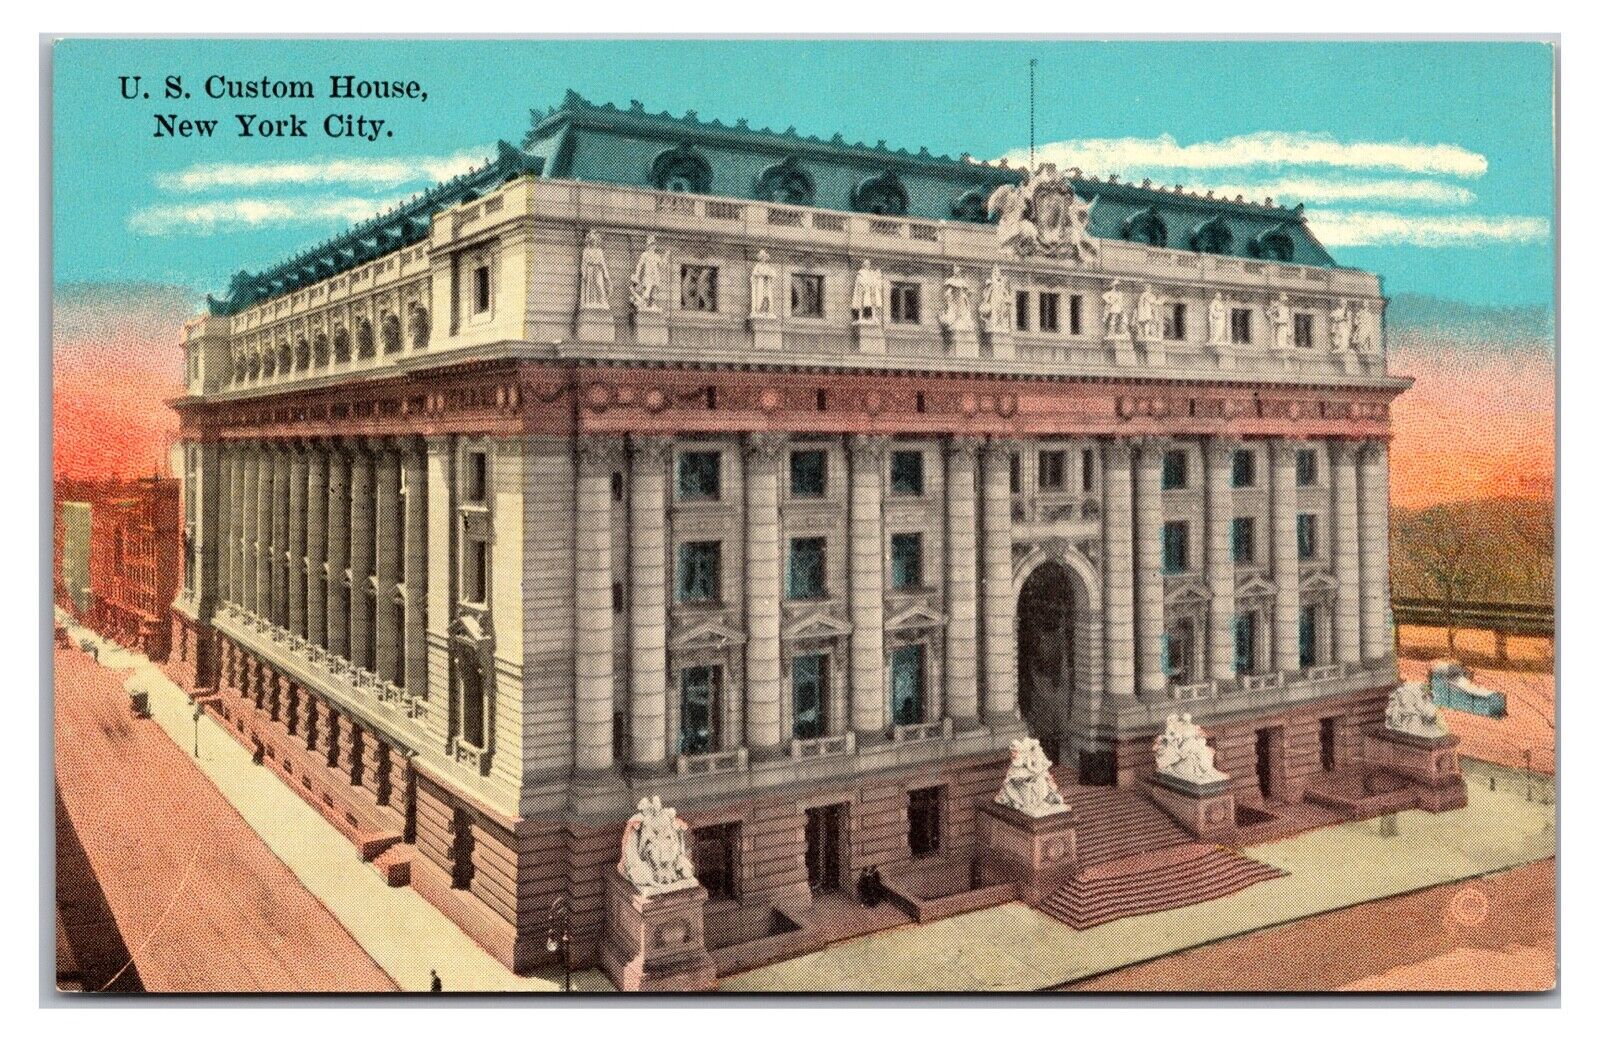 Early 1900s- U.S. Customs House, New York City, New York Postcard (UnPosted)